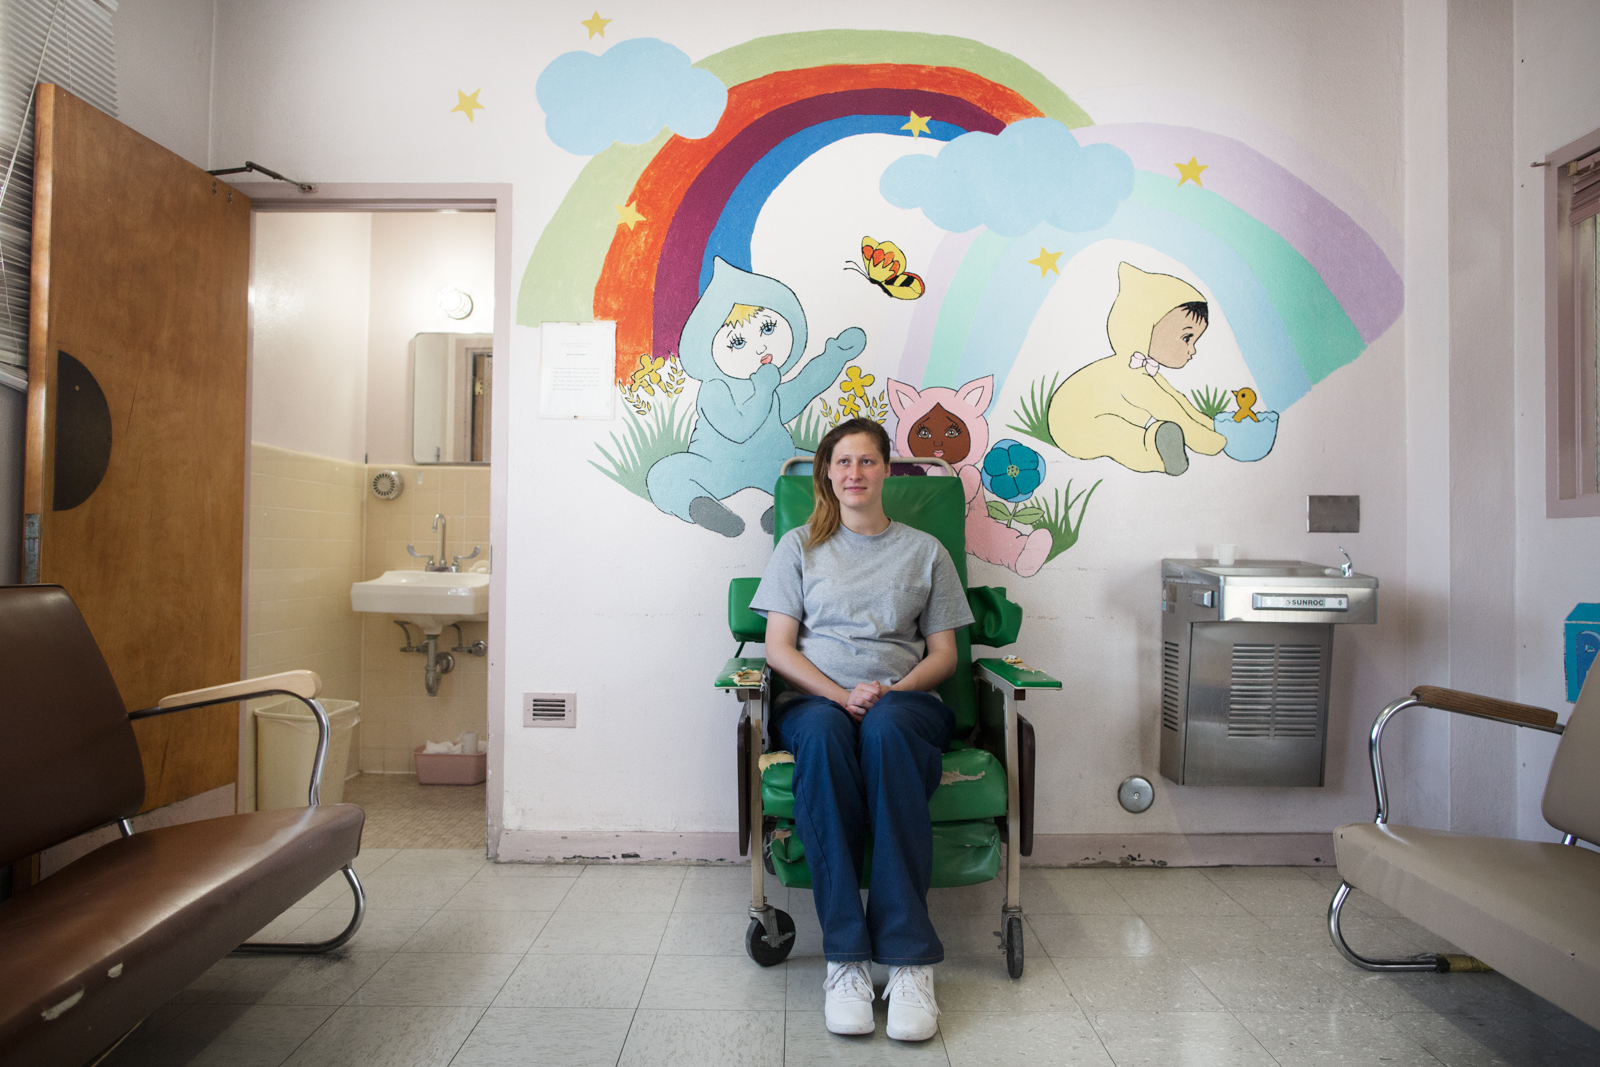 Brittany Bass, 23, sits in the waiting room at the medical ward at the California Institution for Women on May 1, 2013. Twelve days earlier, she had given birth to a daughter, Alexandra Rose, who was adopted by a family who lives in Corona.